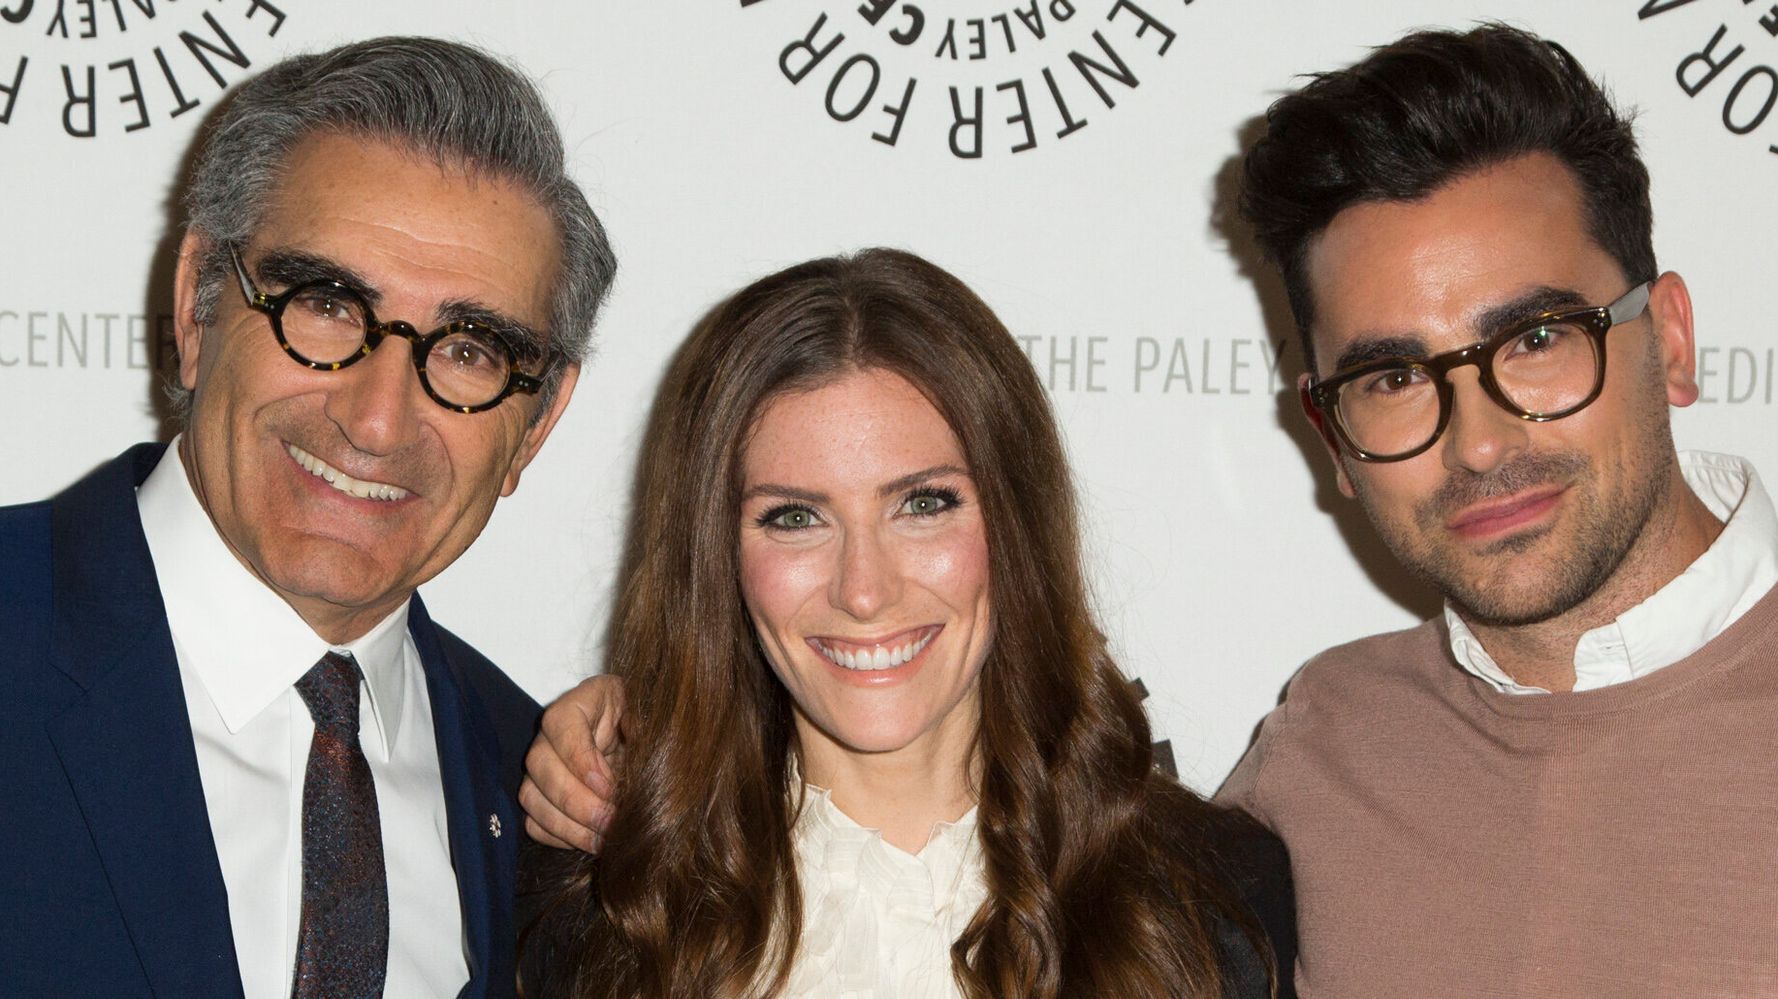 Honest Quotes About Parenthood From Eugene Levy | HuffPost Life